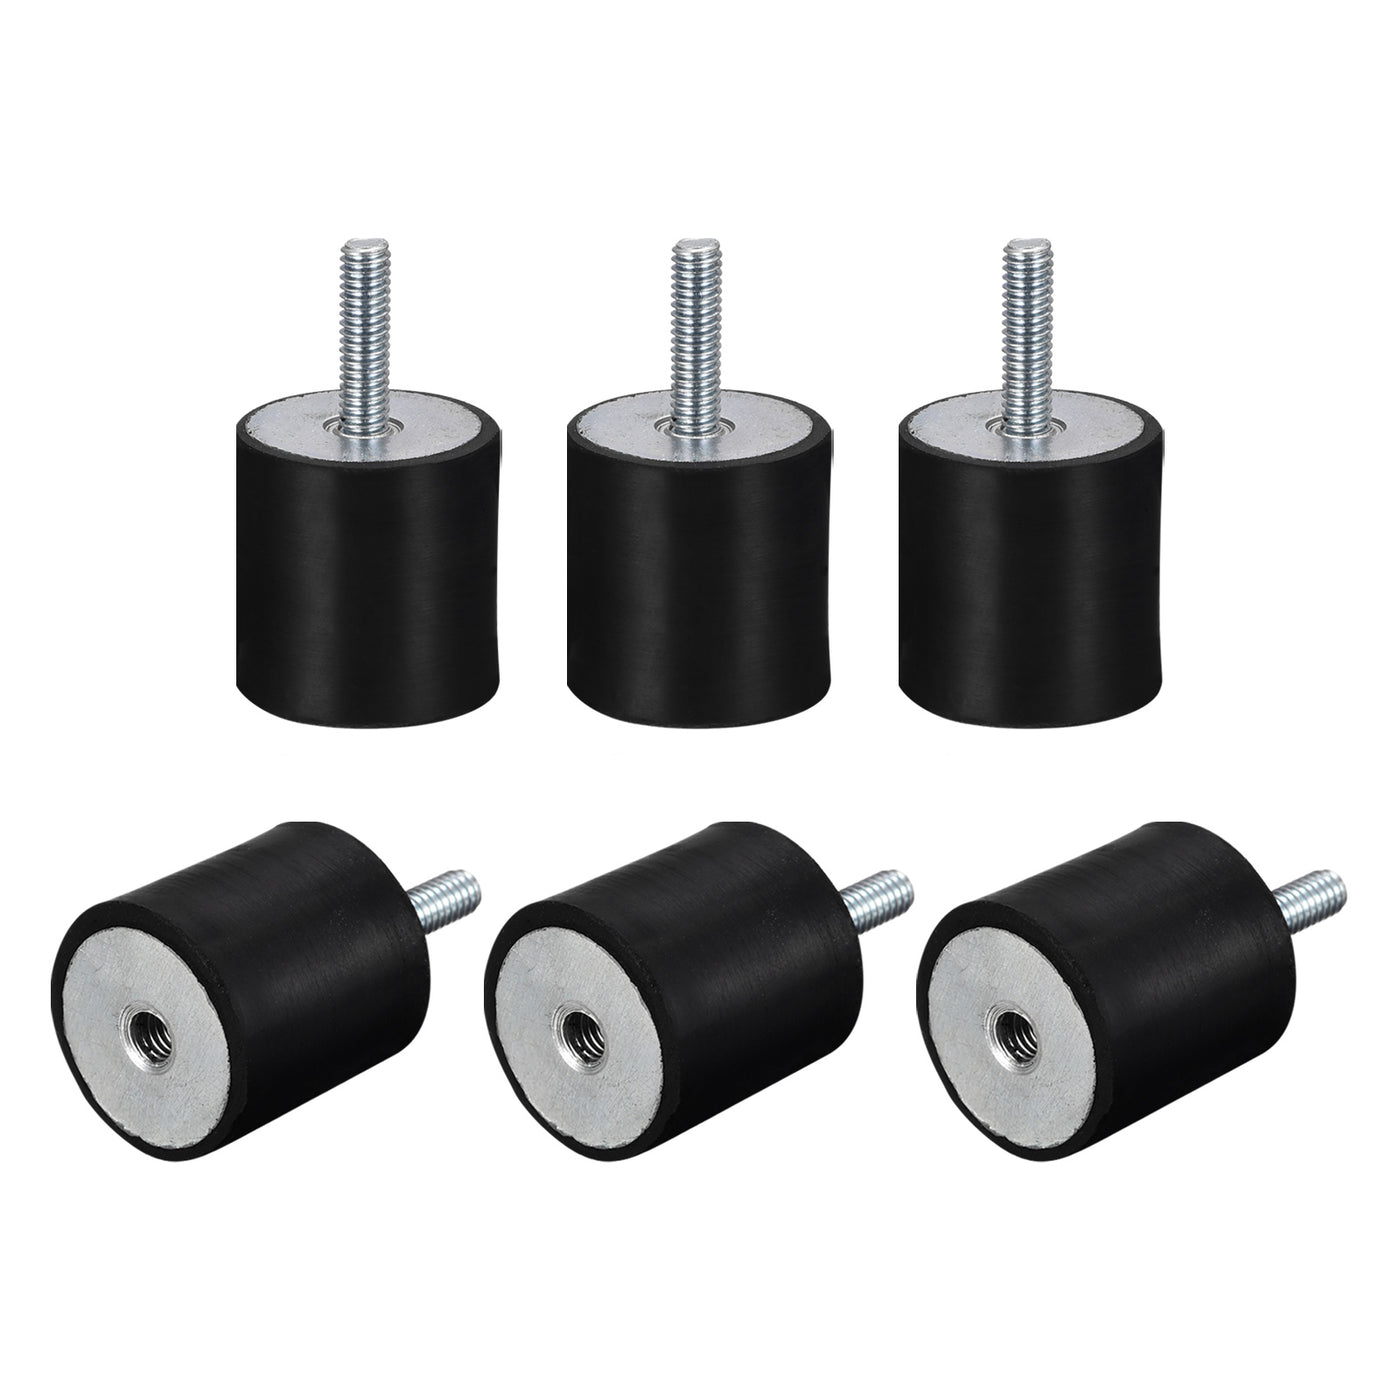 uxcell Uxcell Rubber Mount 6pcs M4 Male/Female Vibration Isolator Shock Absorber, D20mmxH20mm